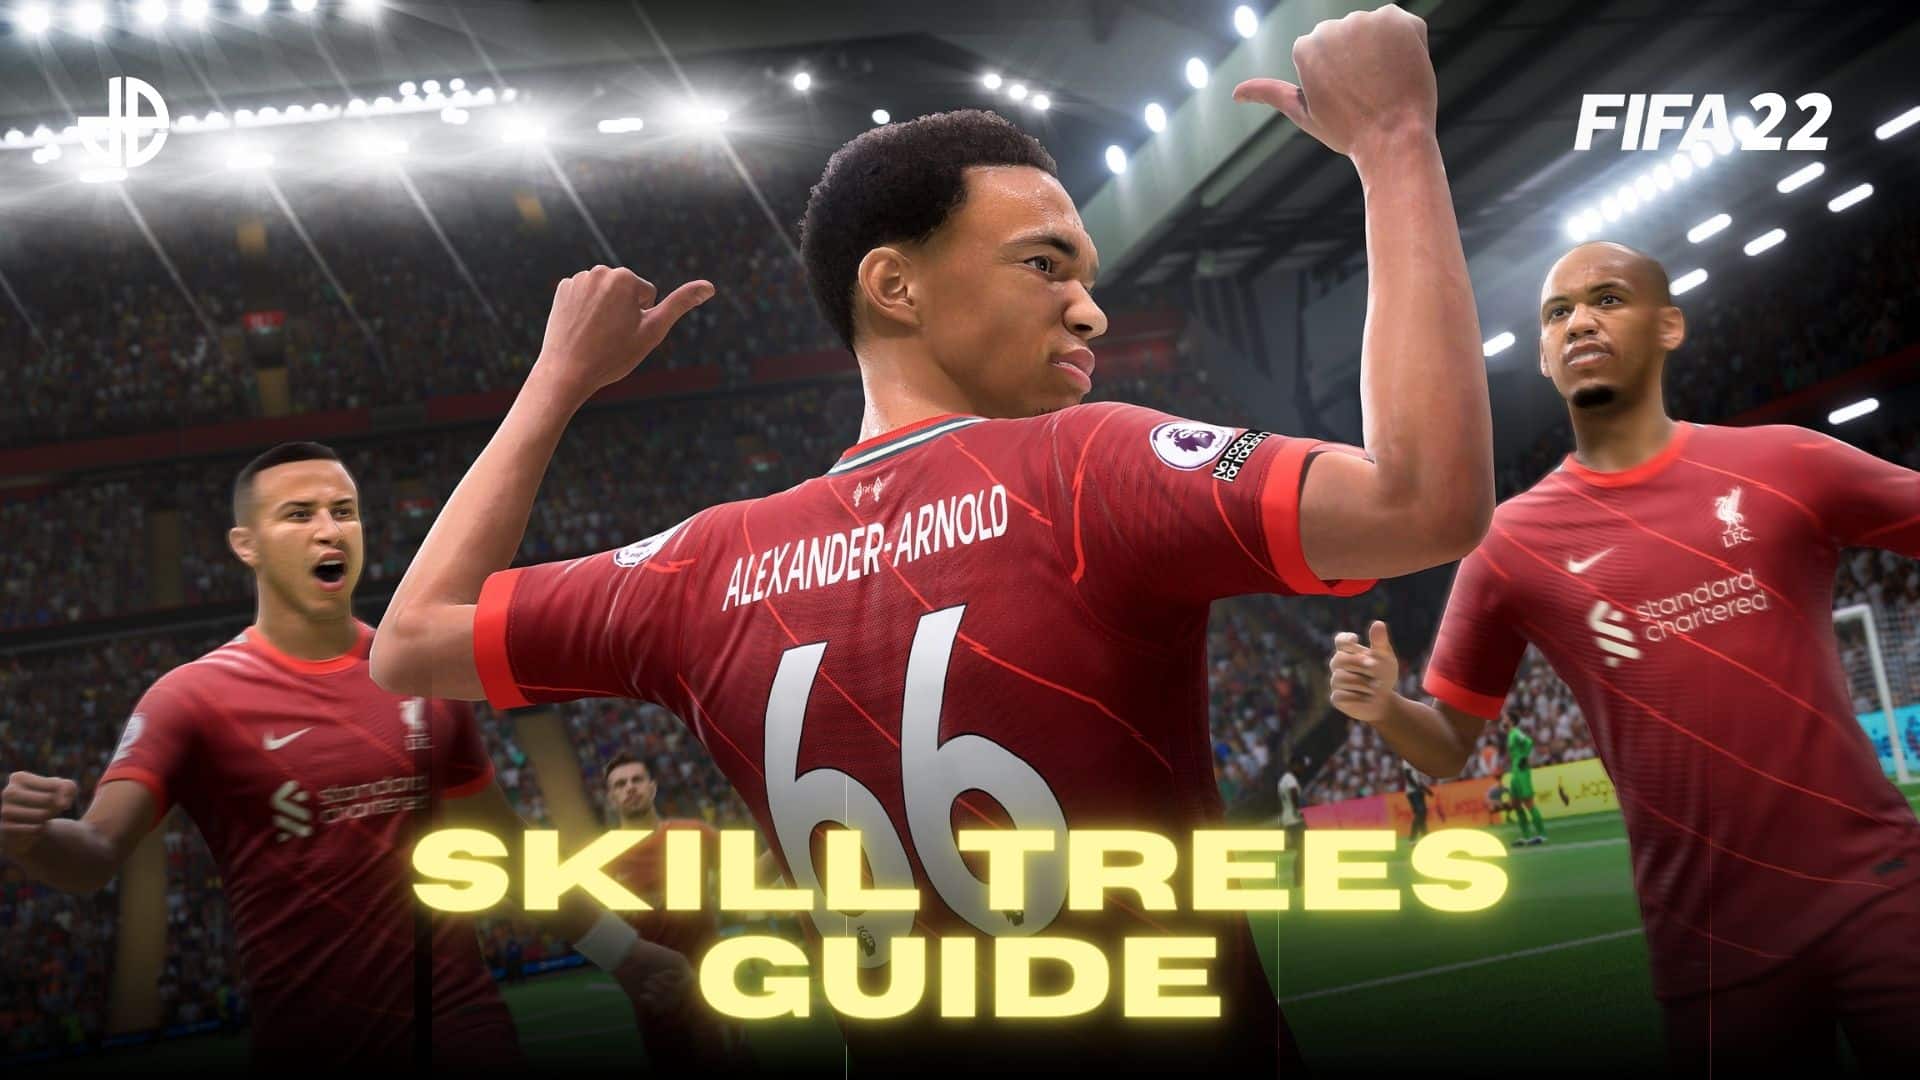 FIFA 22 skill tree guide player career mode